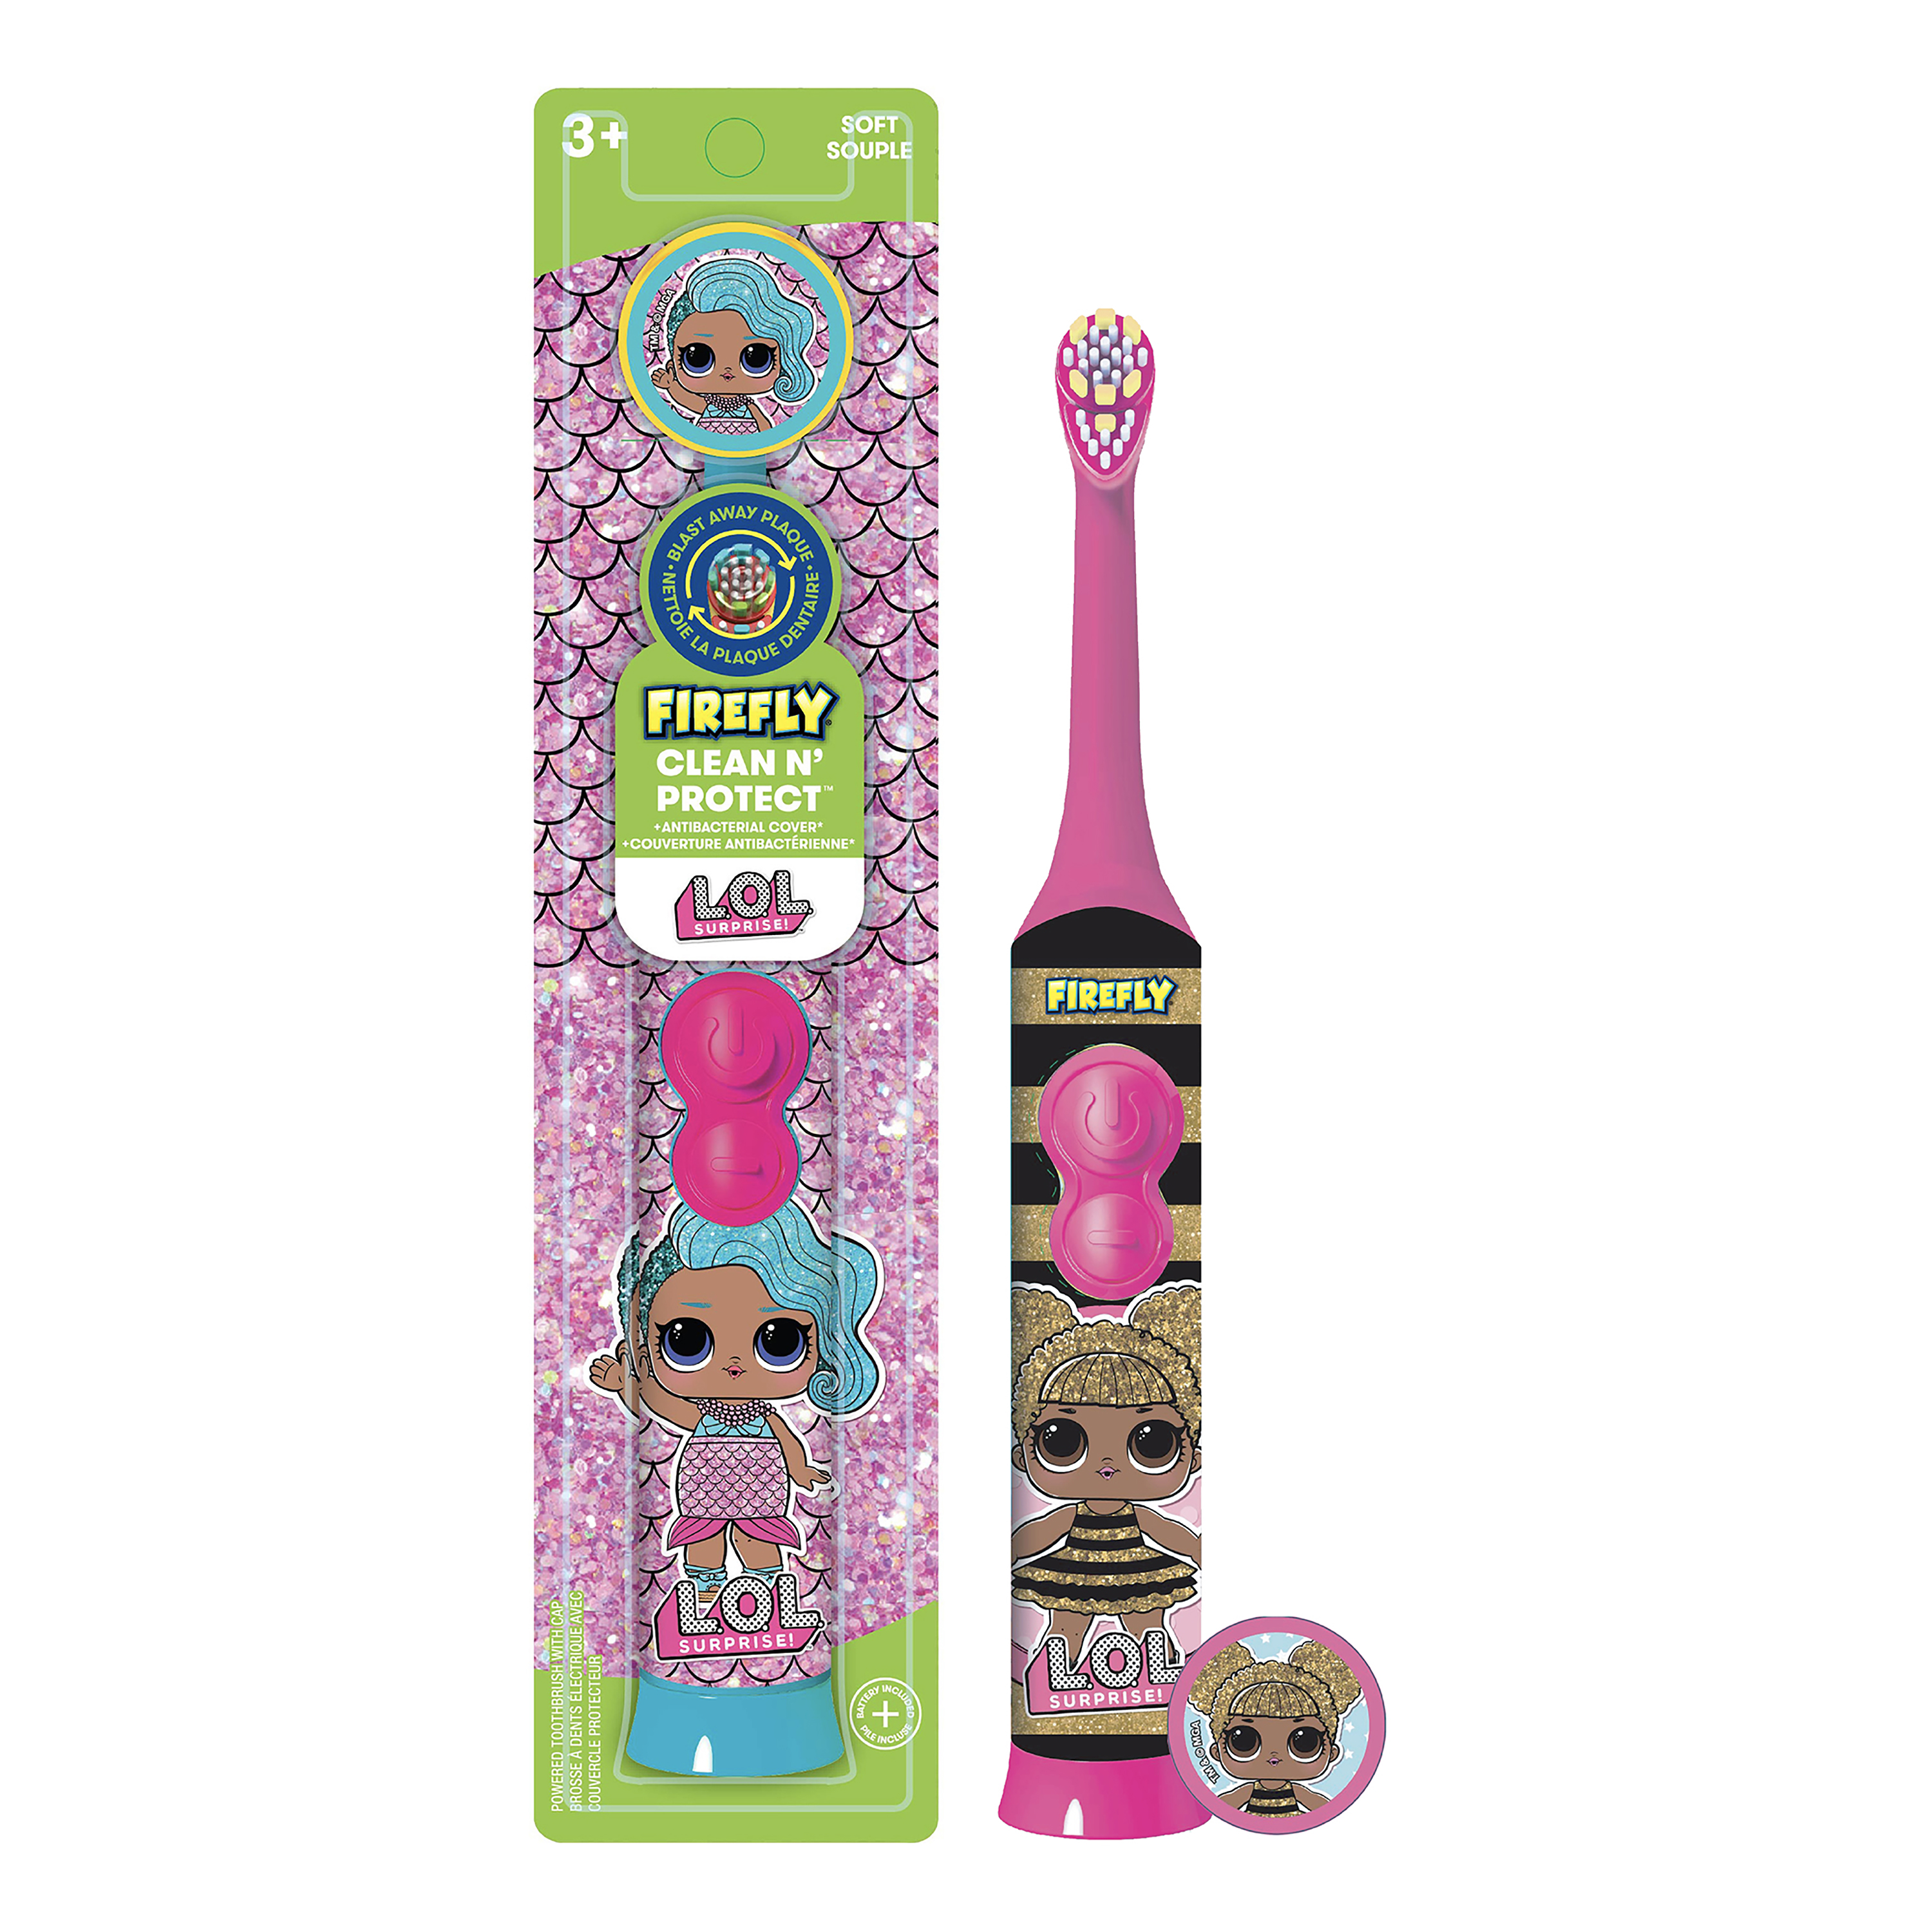 Firefly Clean N' Protect, L.O.L. Surprise! Toothbrush with Antibacterial Character Cover, Soft Bristles, Anti-slip Grip Handle, Battery Included, Ages 3+, 1 Count - image 1 of 10